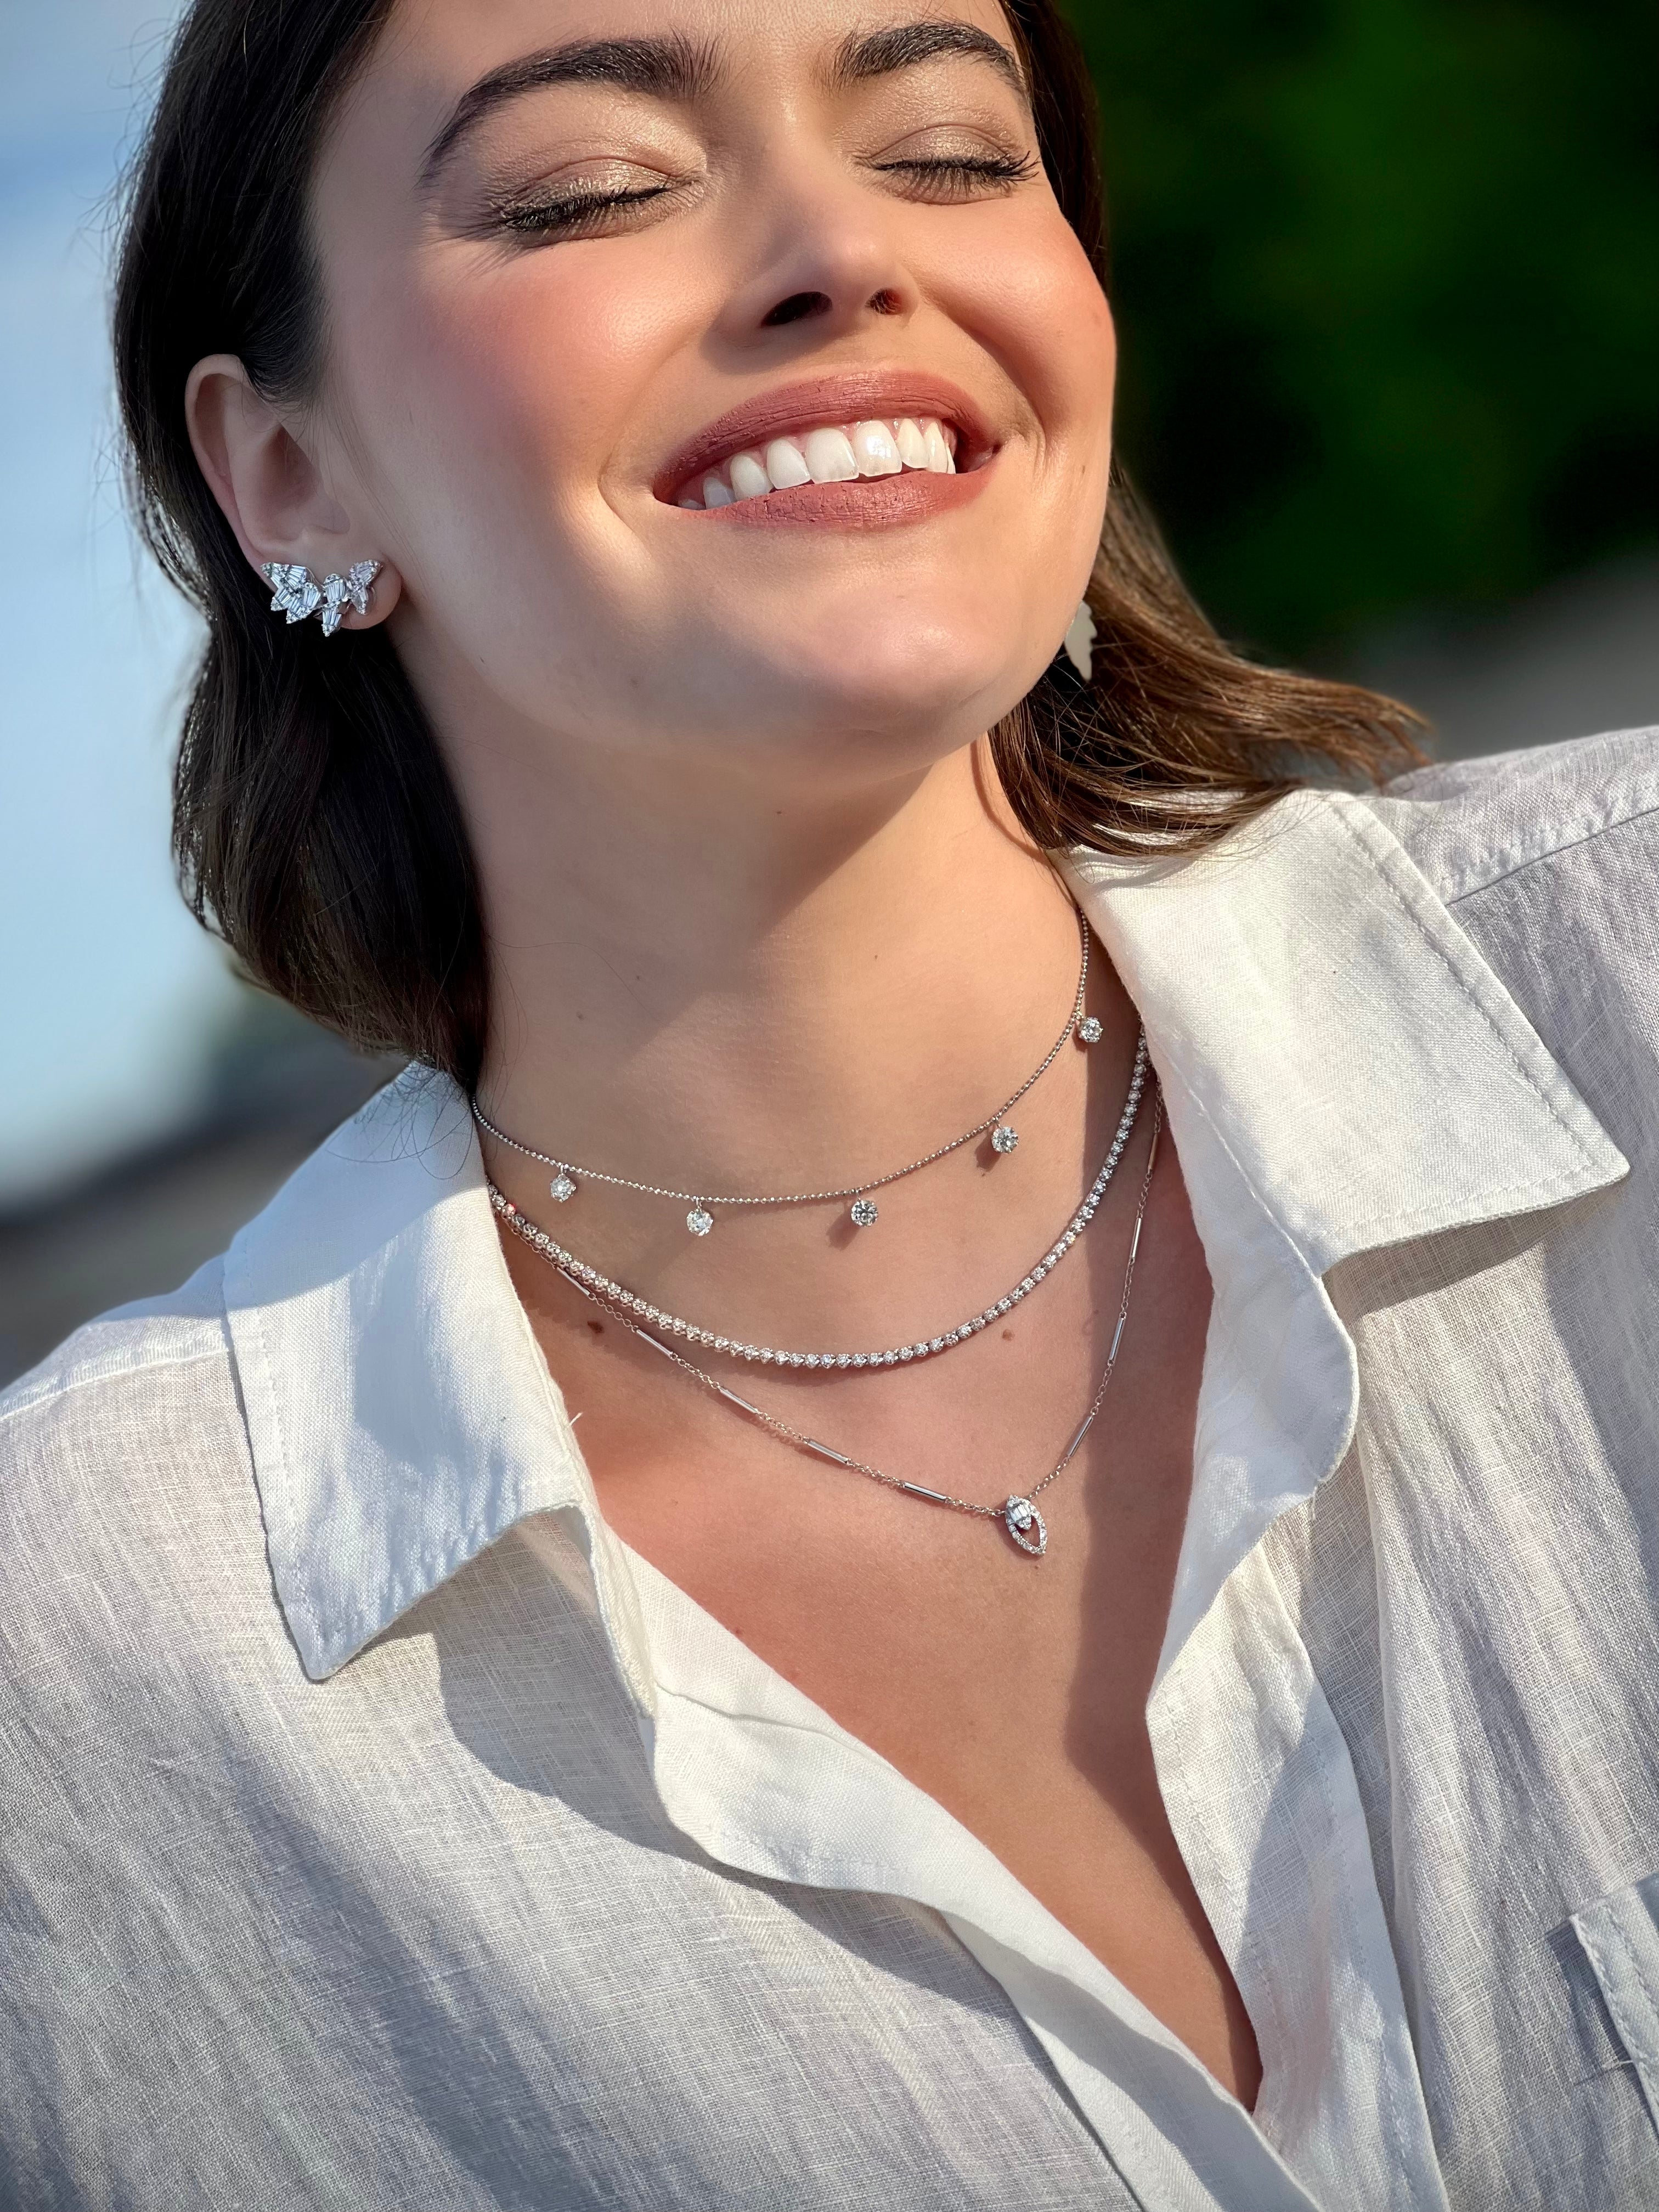 Floating Diamond Three Charm Necklace – Meredith Young Jewelry